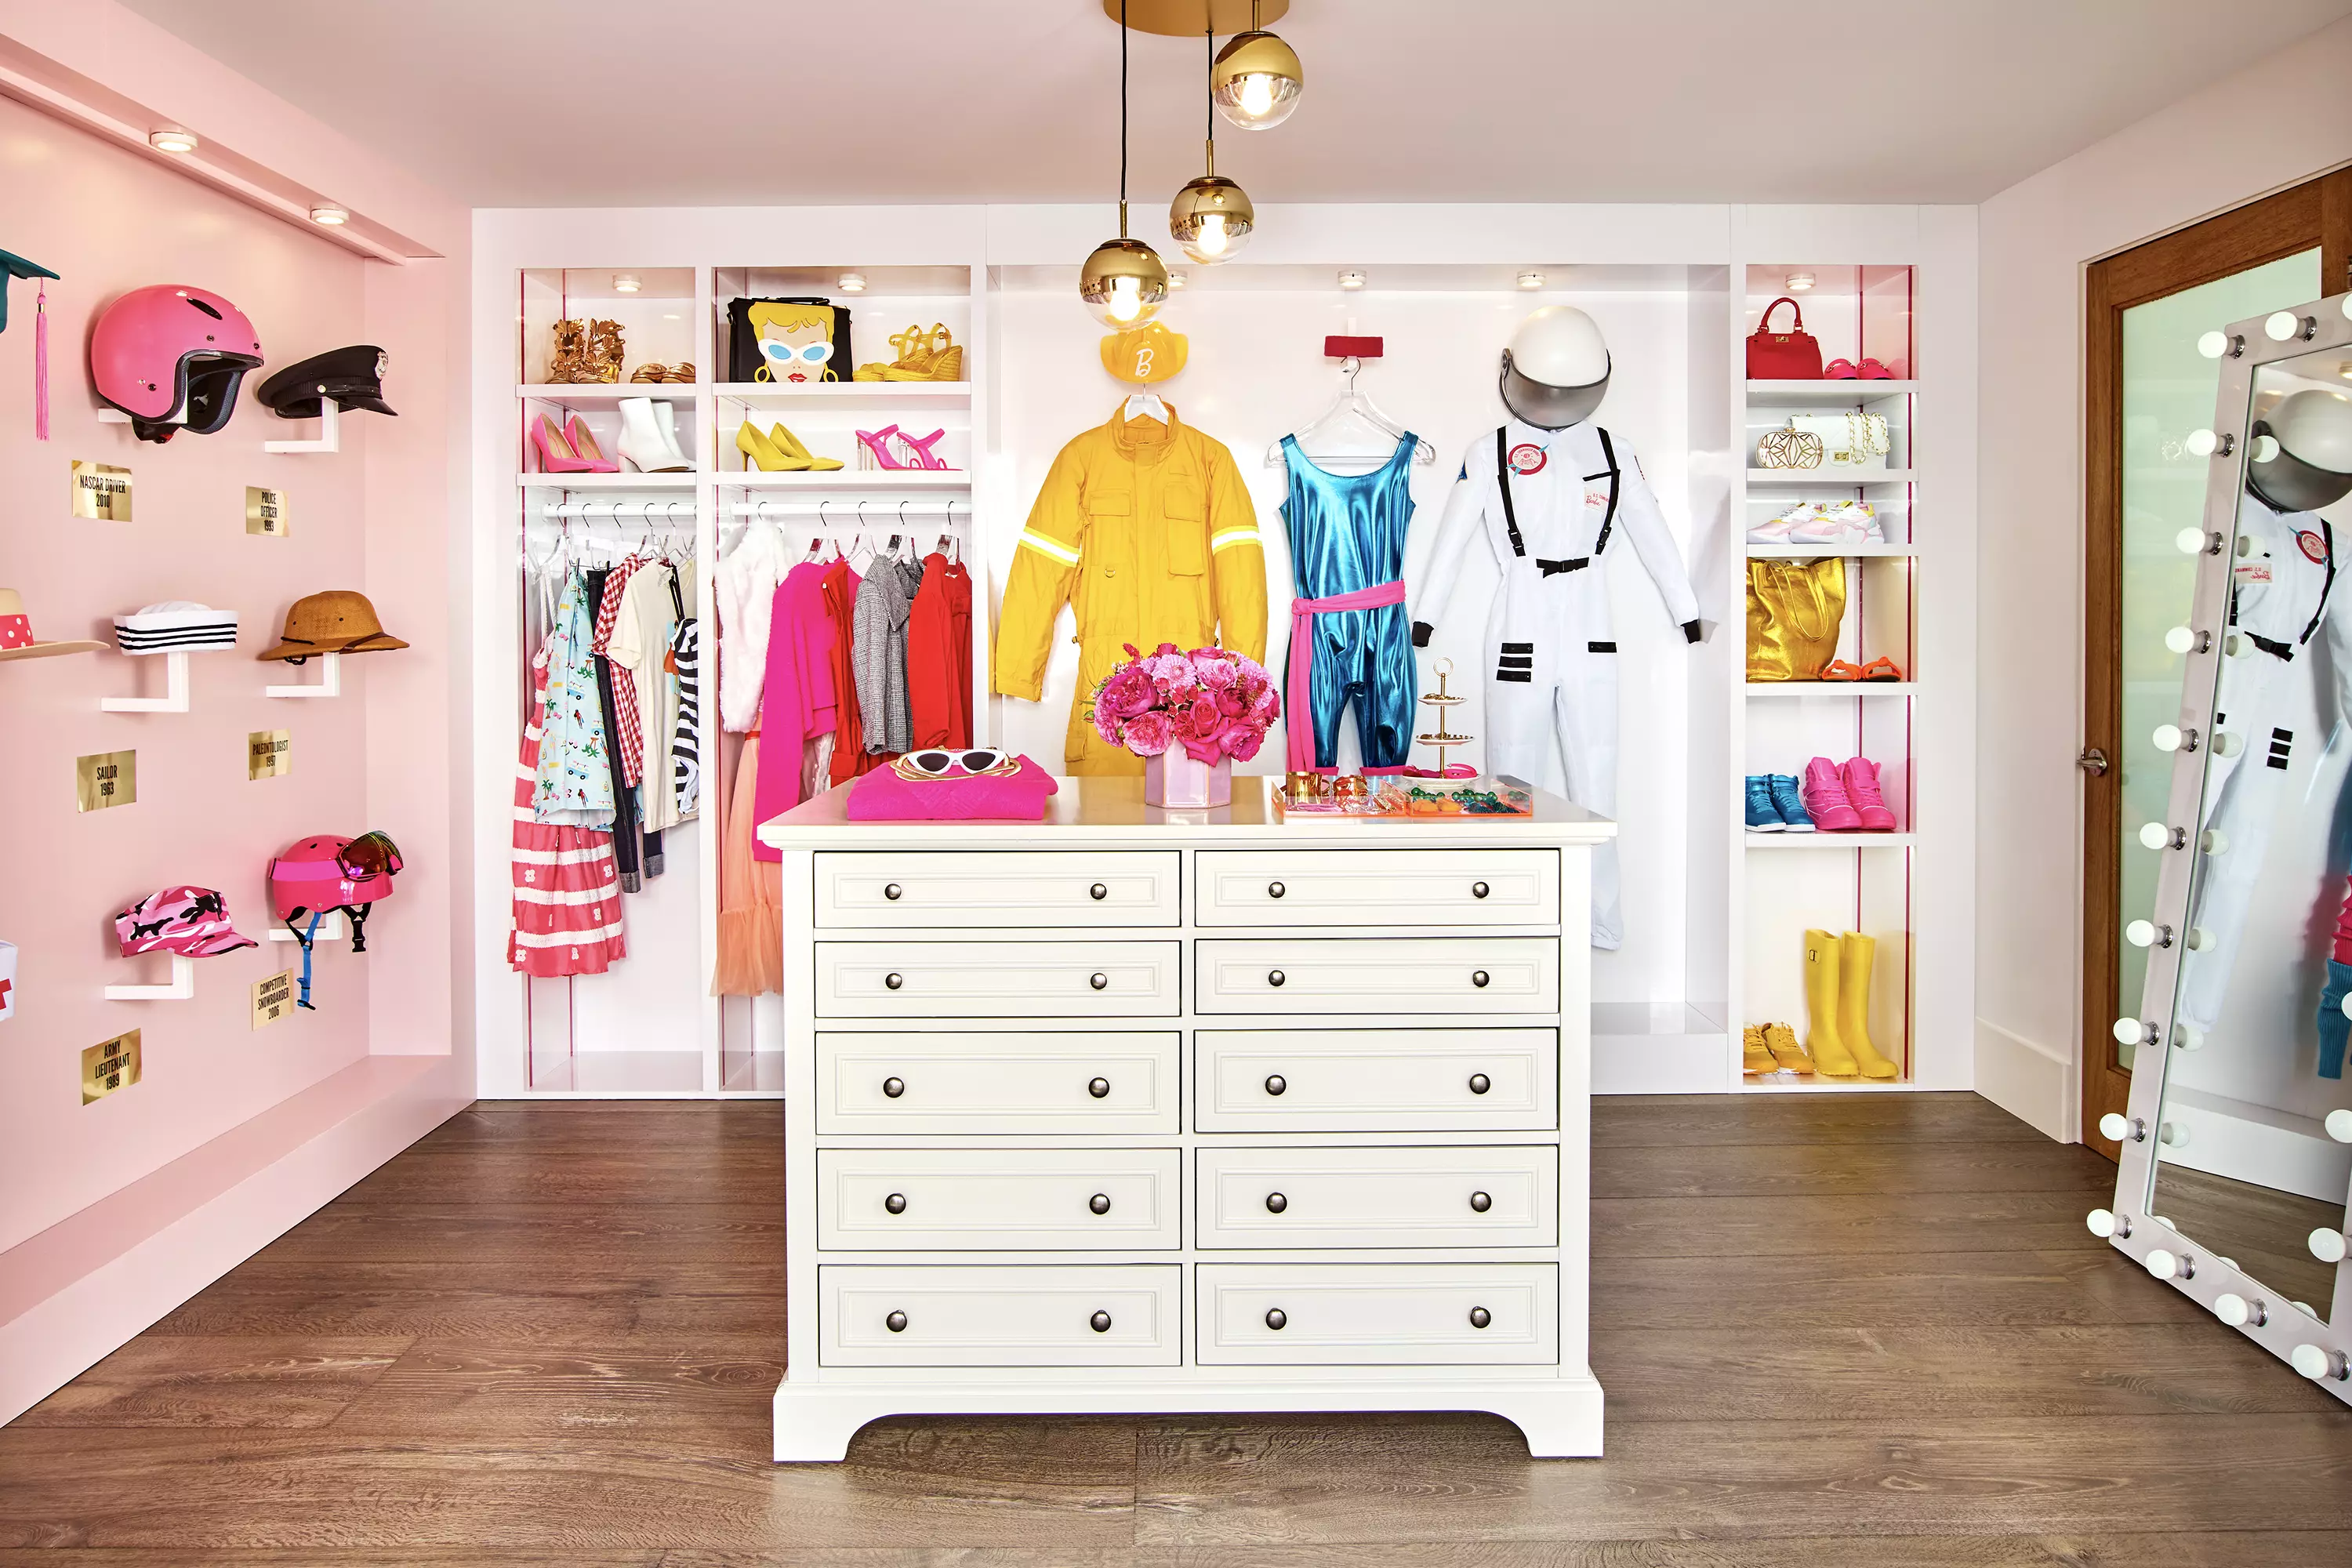 Barbie's dressing room features life-size versions of all her best outfits from over the years for a dress-up session. (